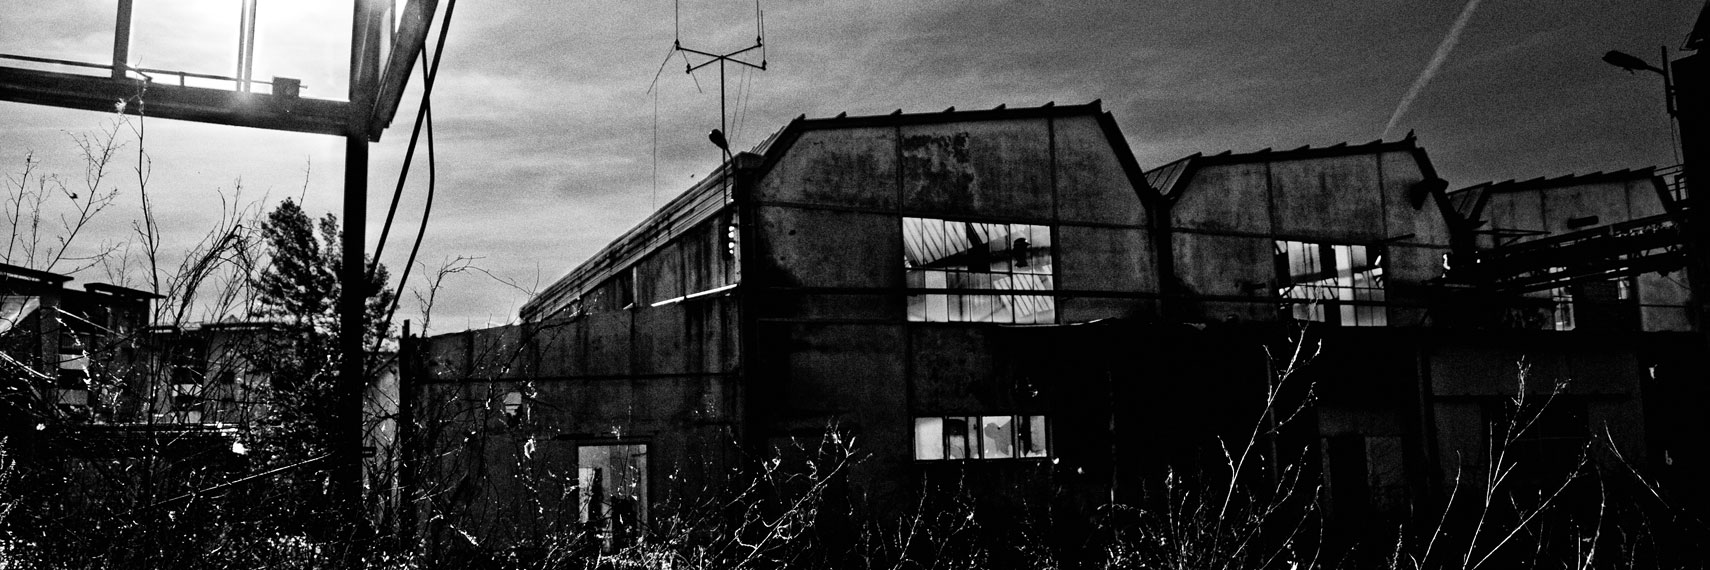 ITALY. Florence, 29th May 2011. A displaced factory in the city outskirts.